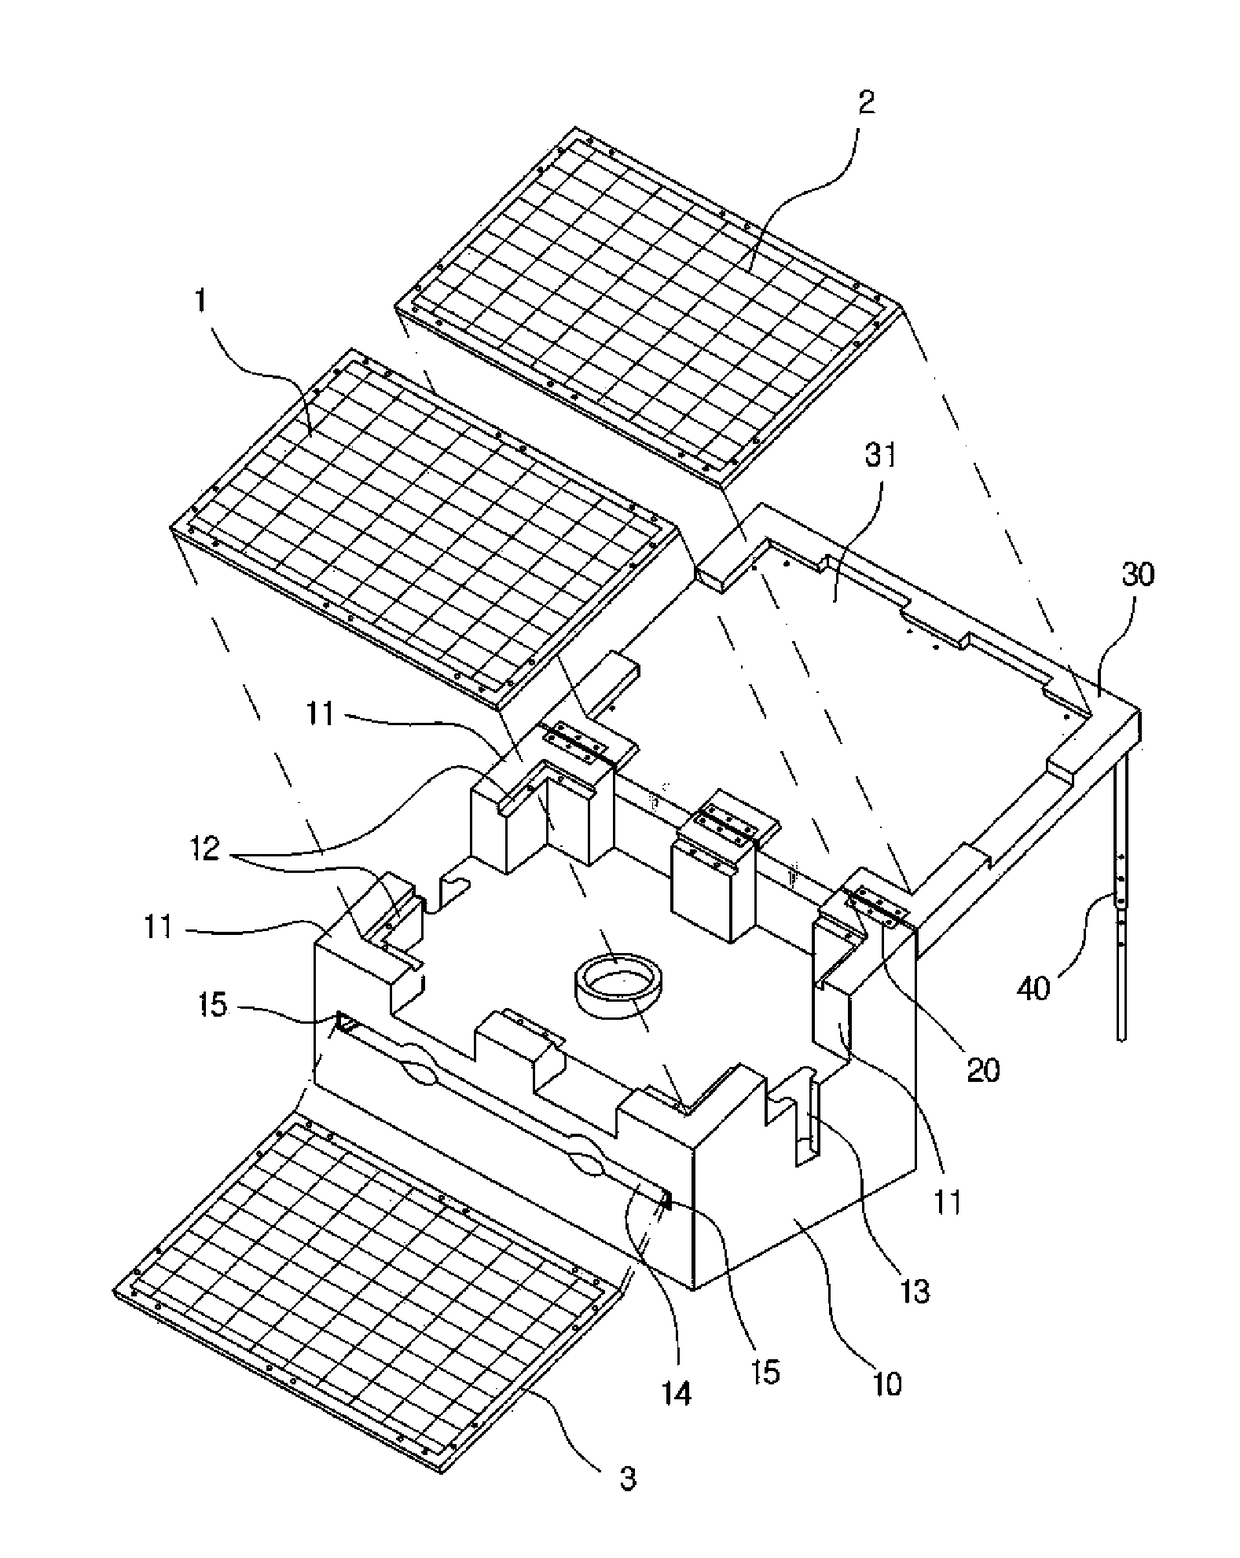 Extended photovoltaic module fixture